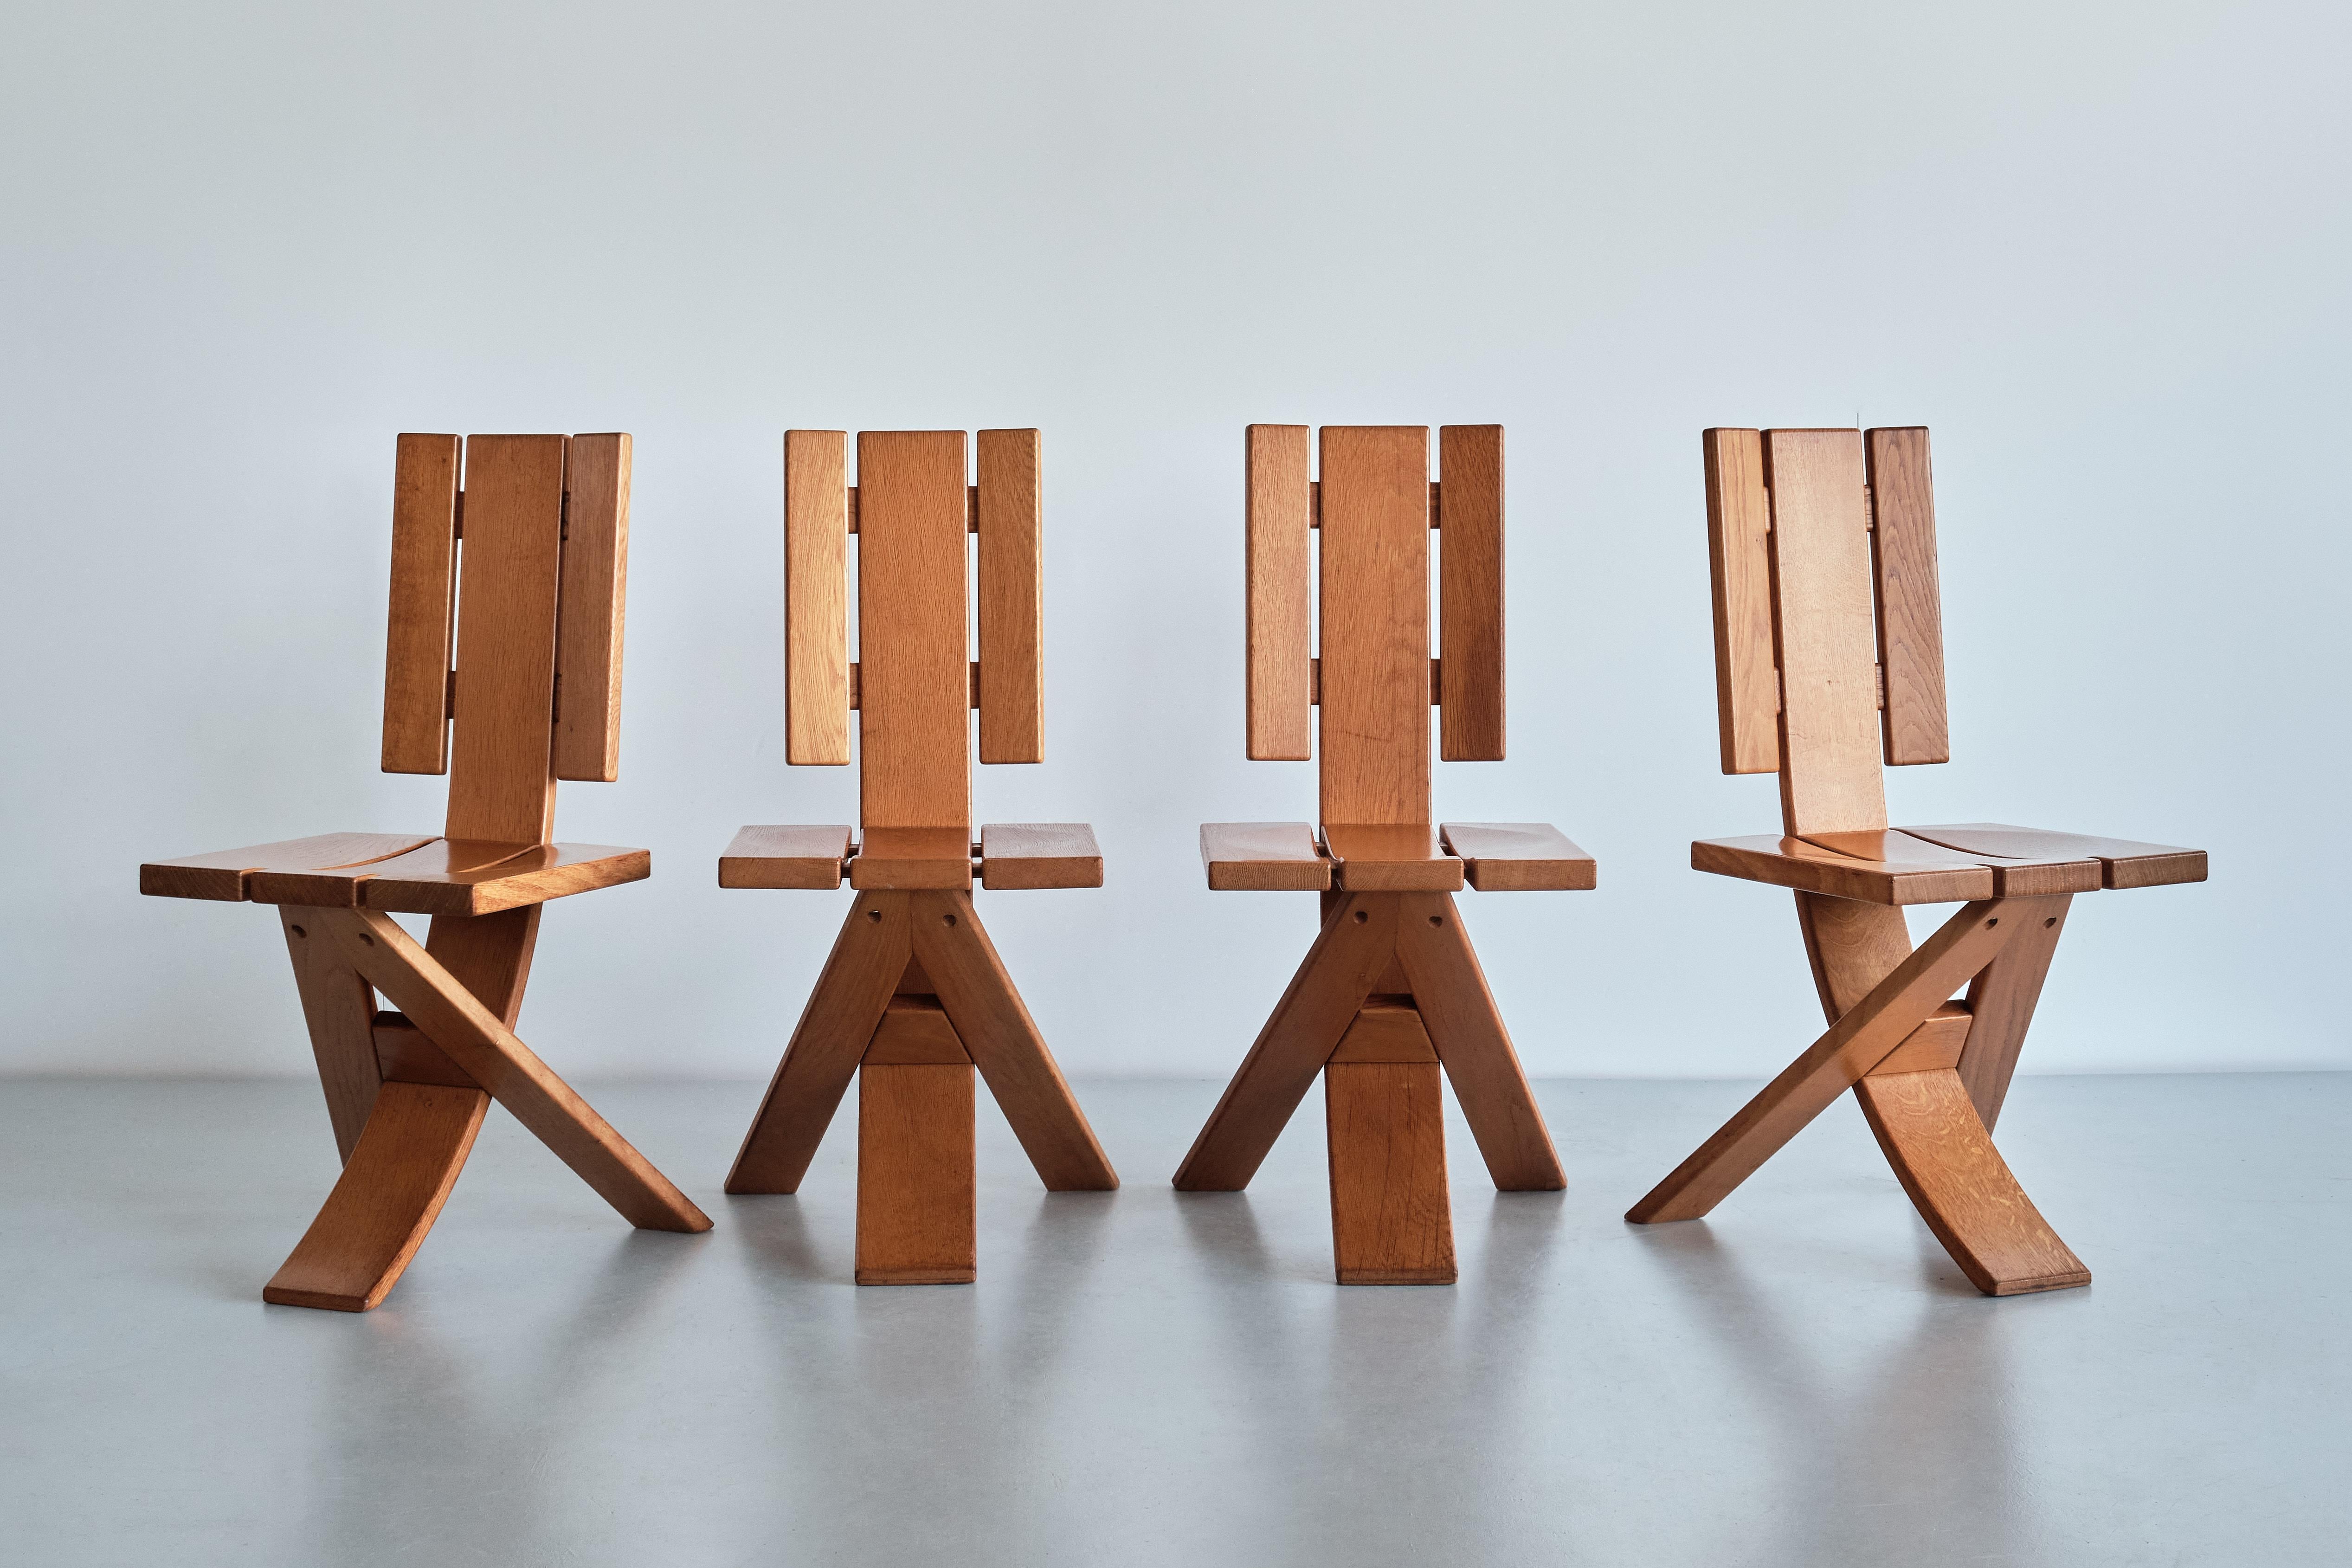 Sculptural Set of Four Ebénisterie Seltz Dining Chairs in Oak, France, 1970s For Sale 5